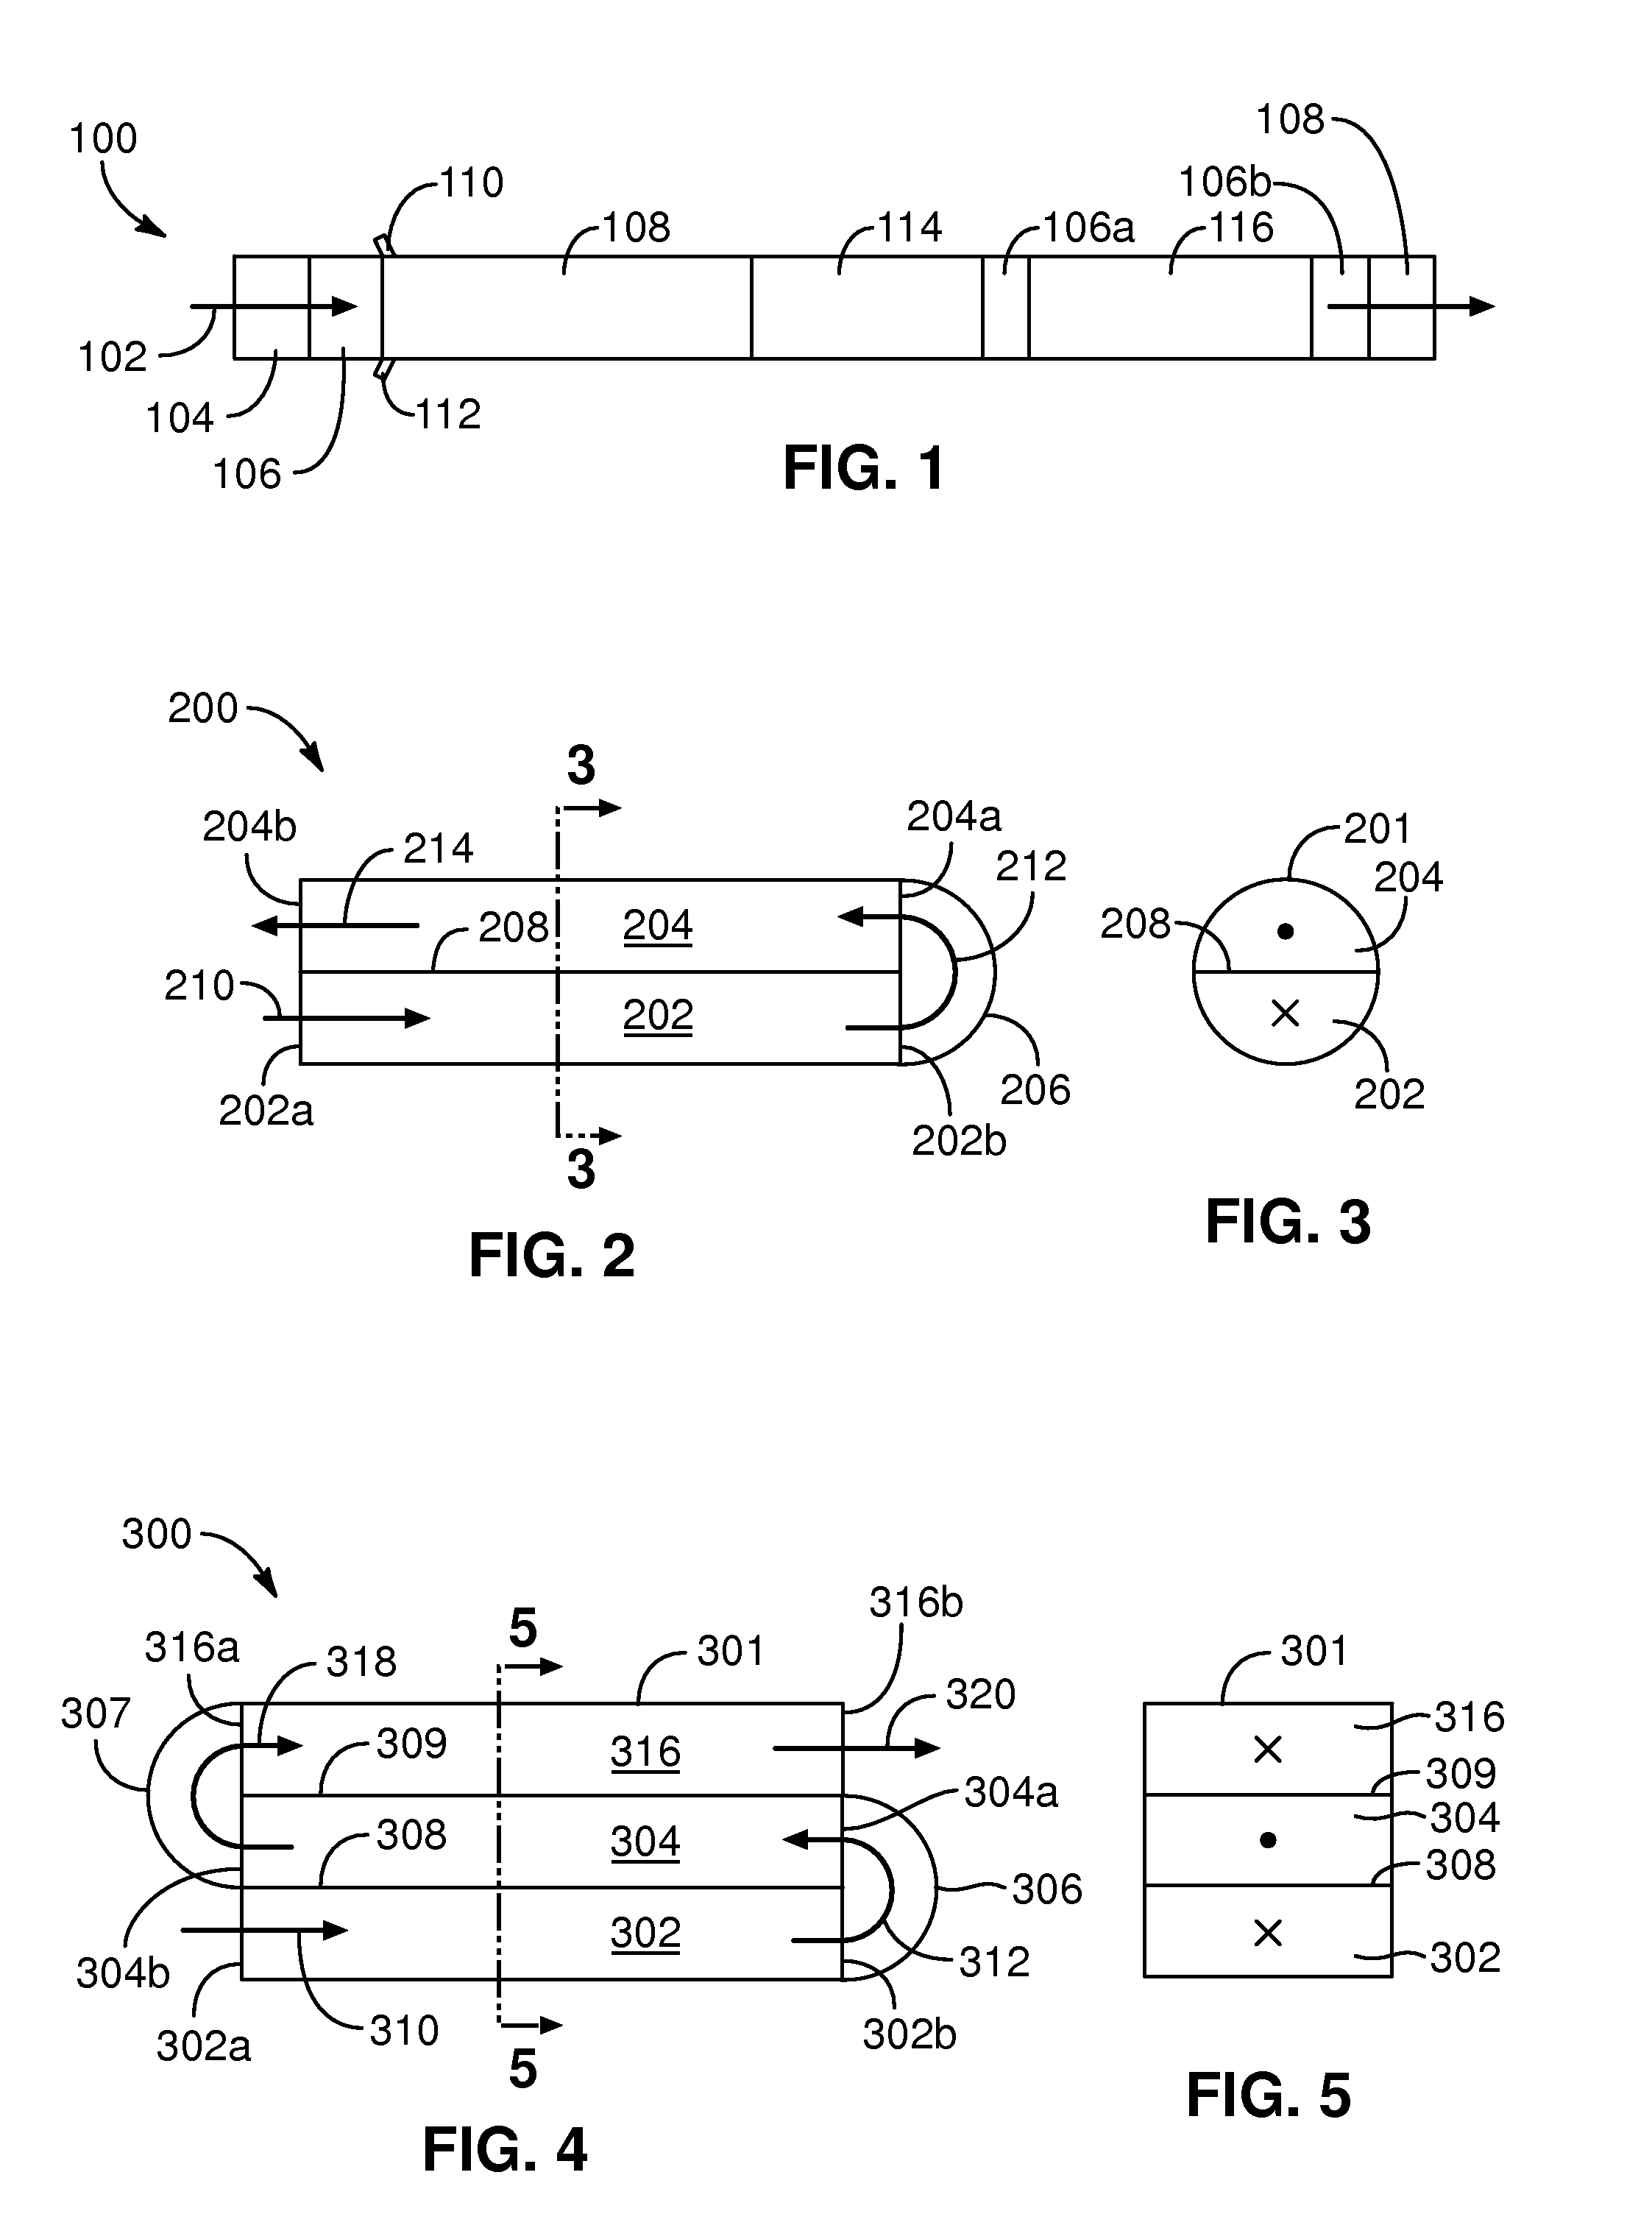 Exhaust treatment packaging apparatus, system, and method